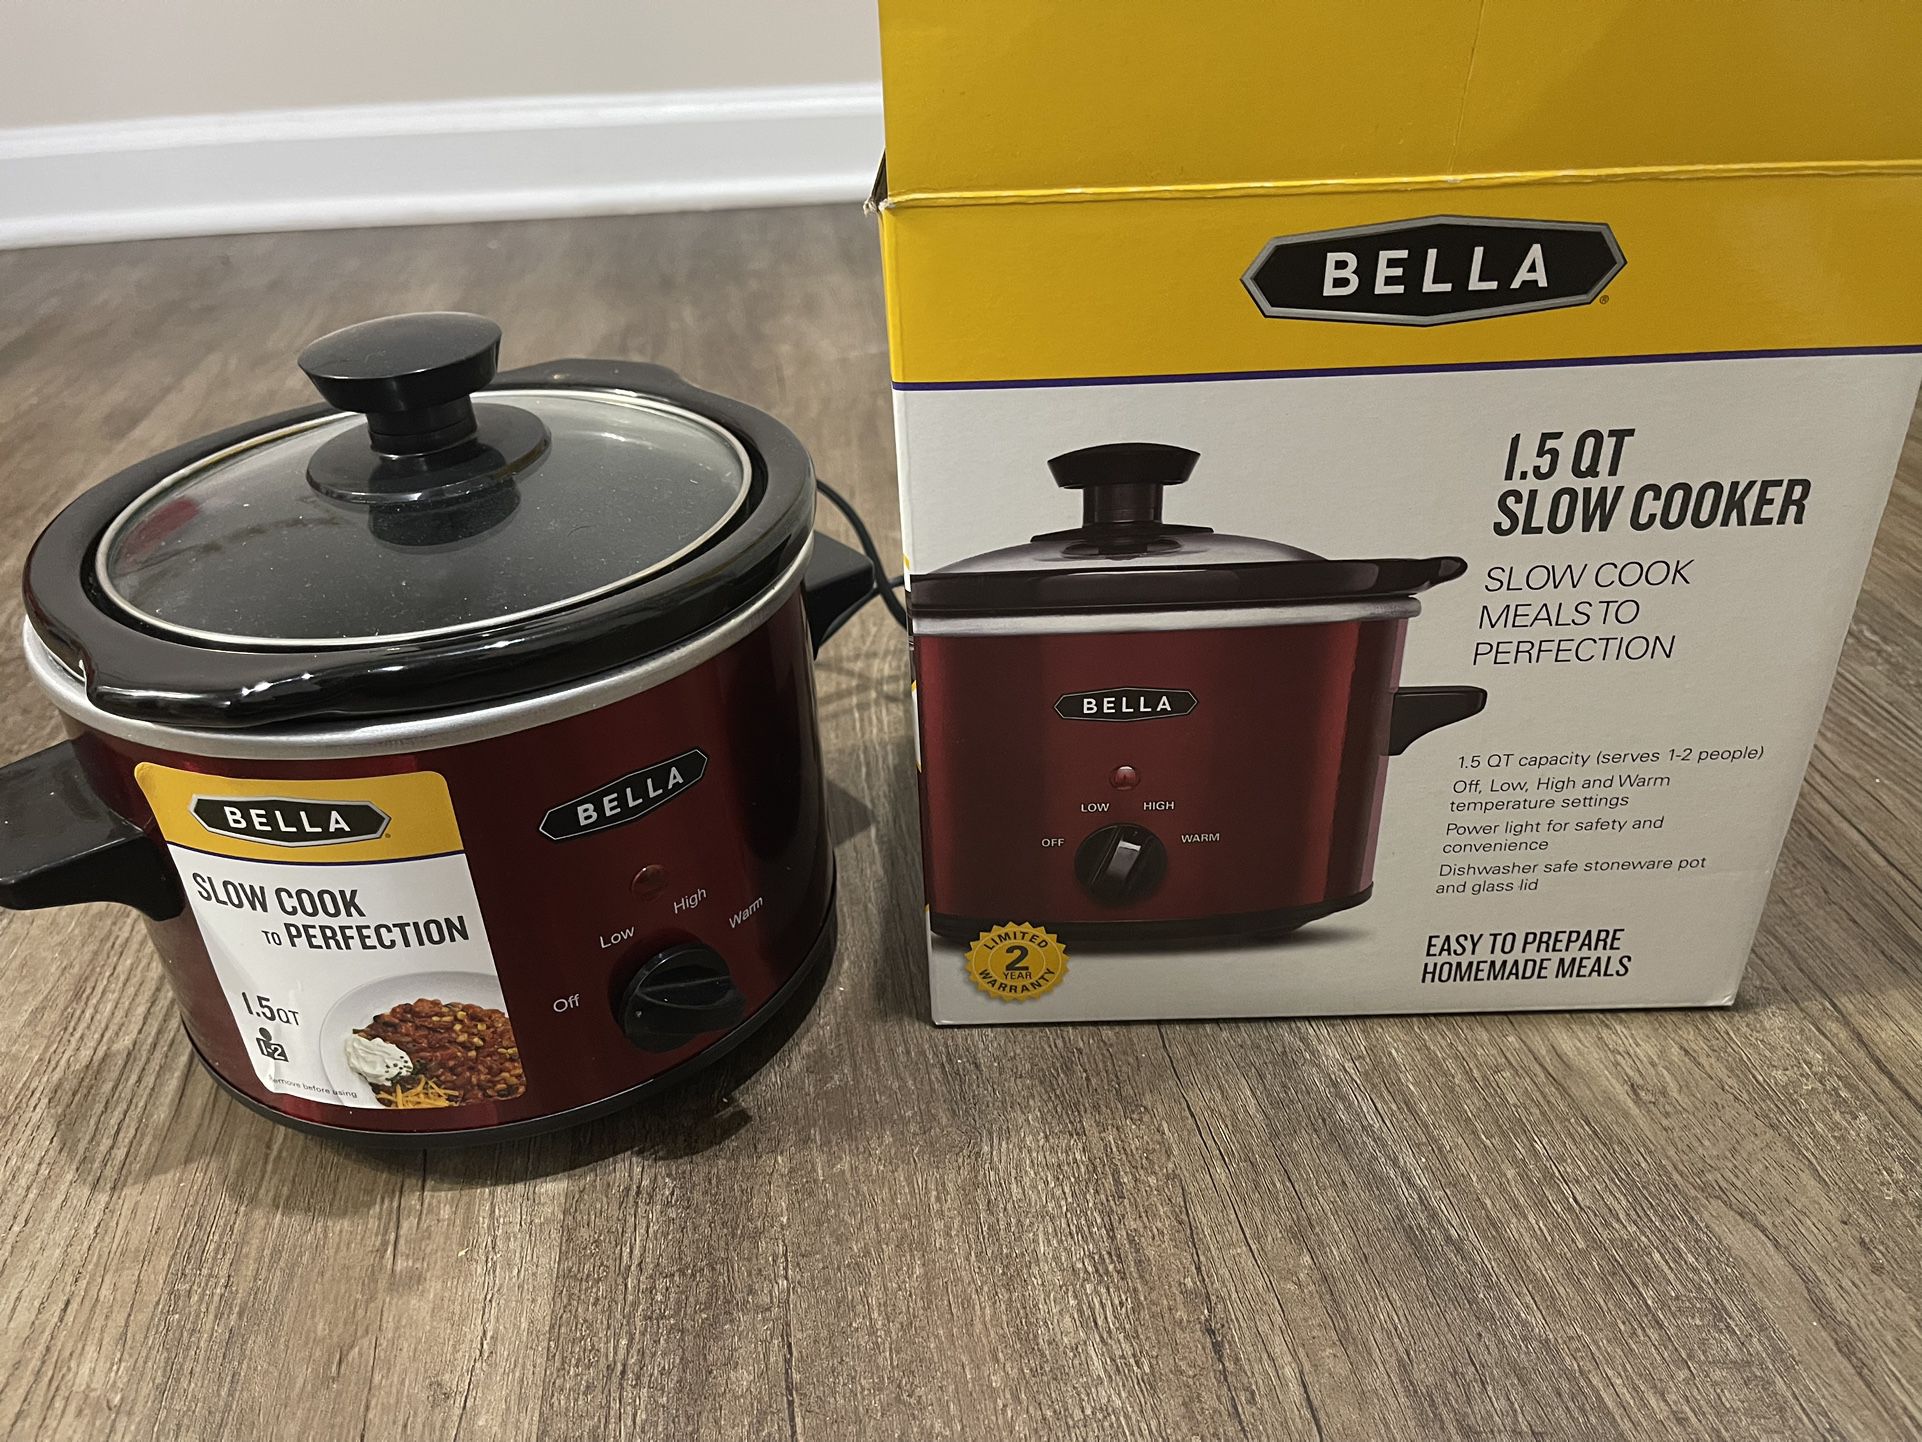 4 Quart Crockpot Slow Cooker - Like New for Sale in Charlotte, NC - OfferUp